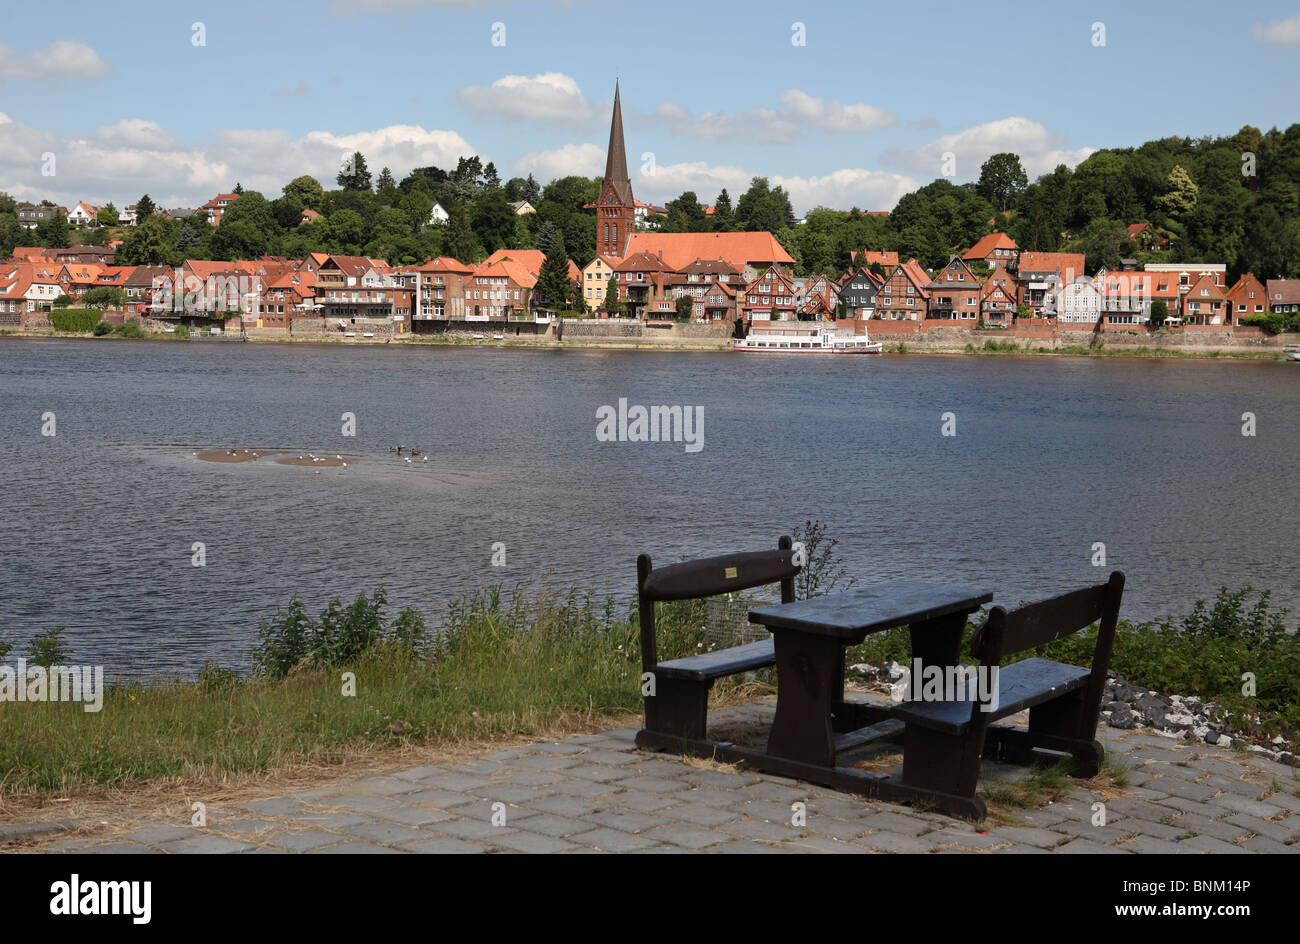 The German town Lauenburg seen from across the river Elbe, taken from the Elbe cycle path or Elberadweg. Stock Photo